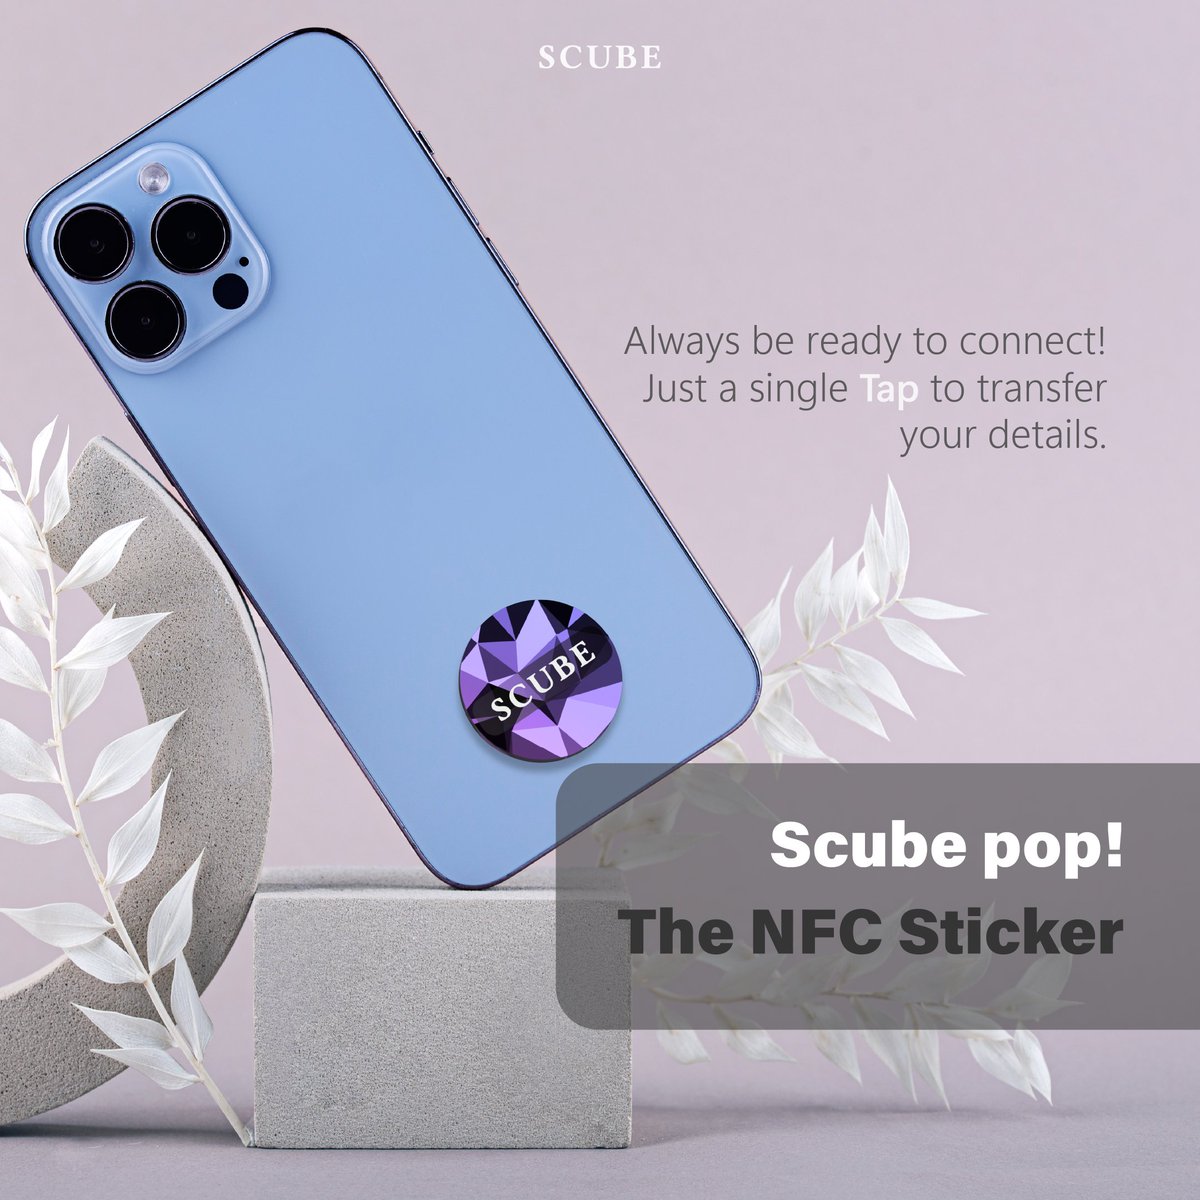 A quick and easy way to connect!
Network faster and smarter with Scube pops.

Stick it on the back of your phone and tap to share your info. It's that simple! 

#nfcstickers #nfctags #taptoshare #networking #networkingbusiness #qrcode #networkingtool #scubeme #scube #scubepops